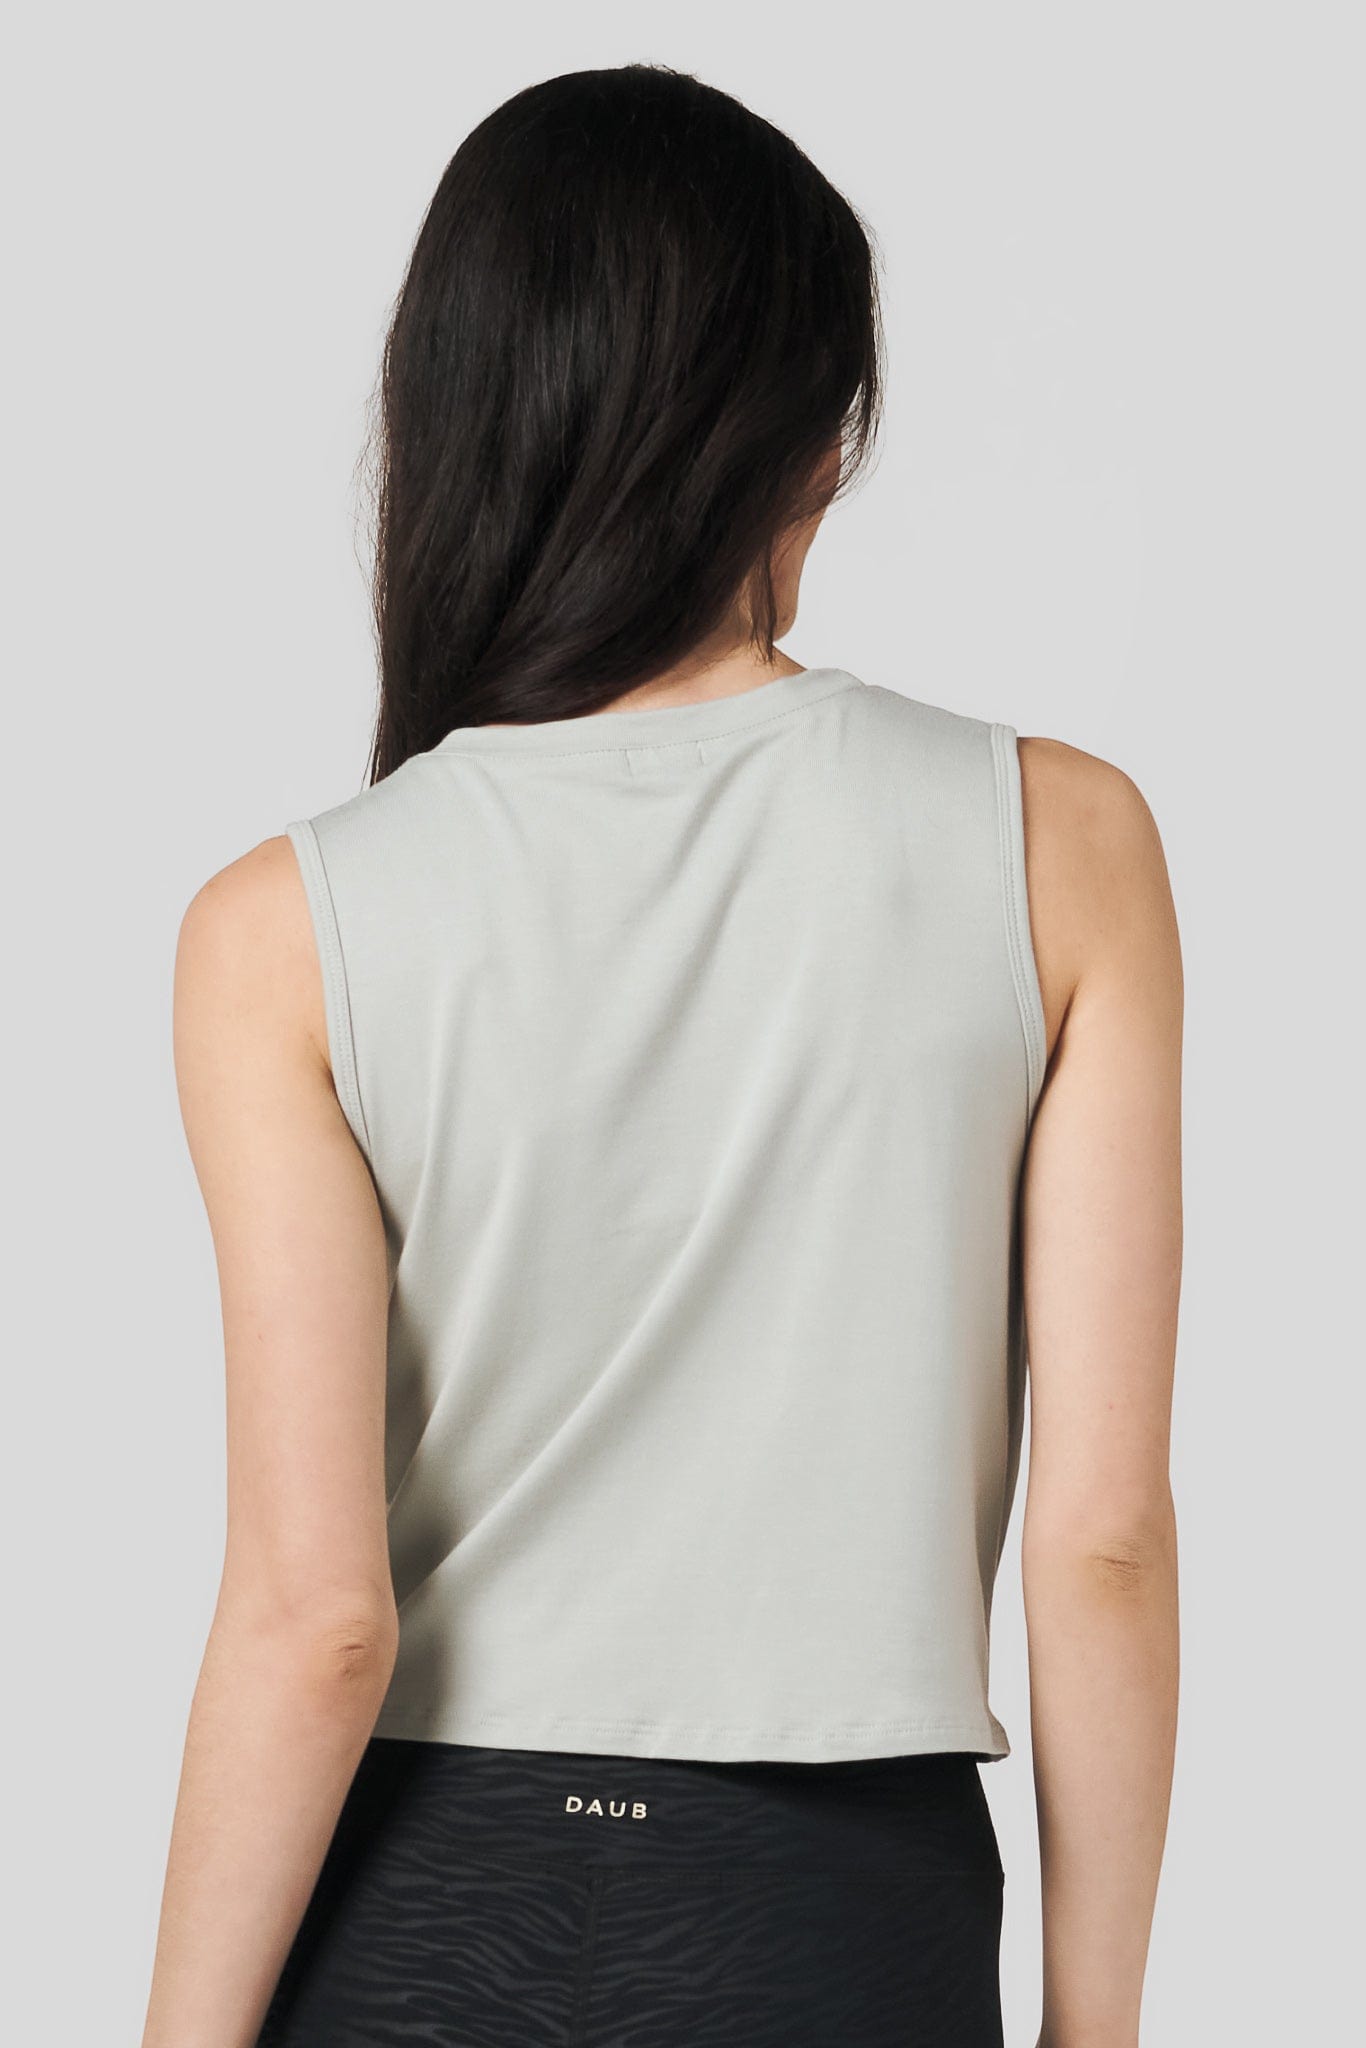 Back of a women wearing sage colour tank top and zebra print legging.